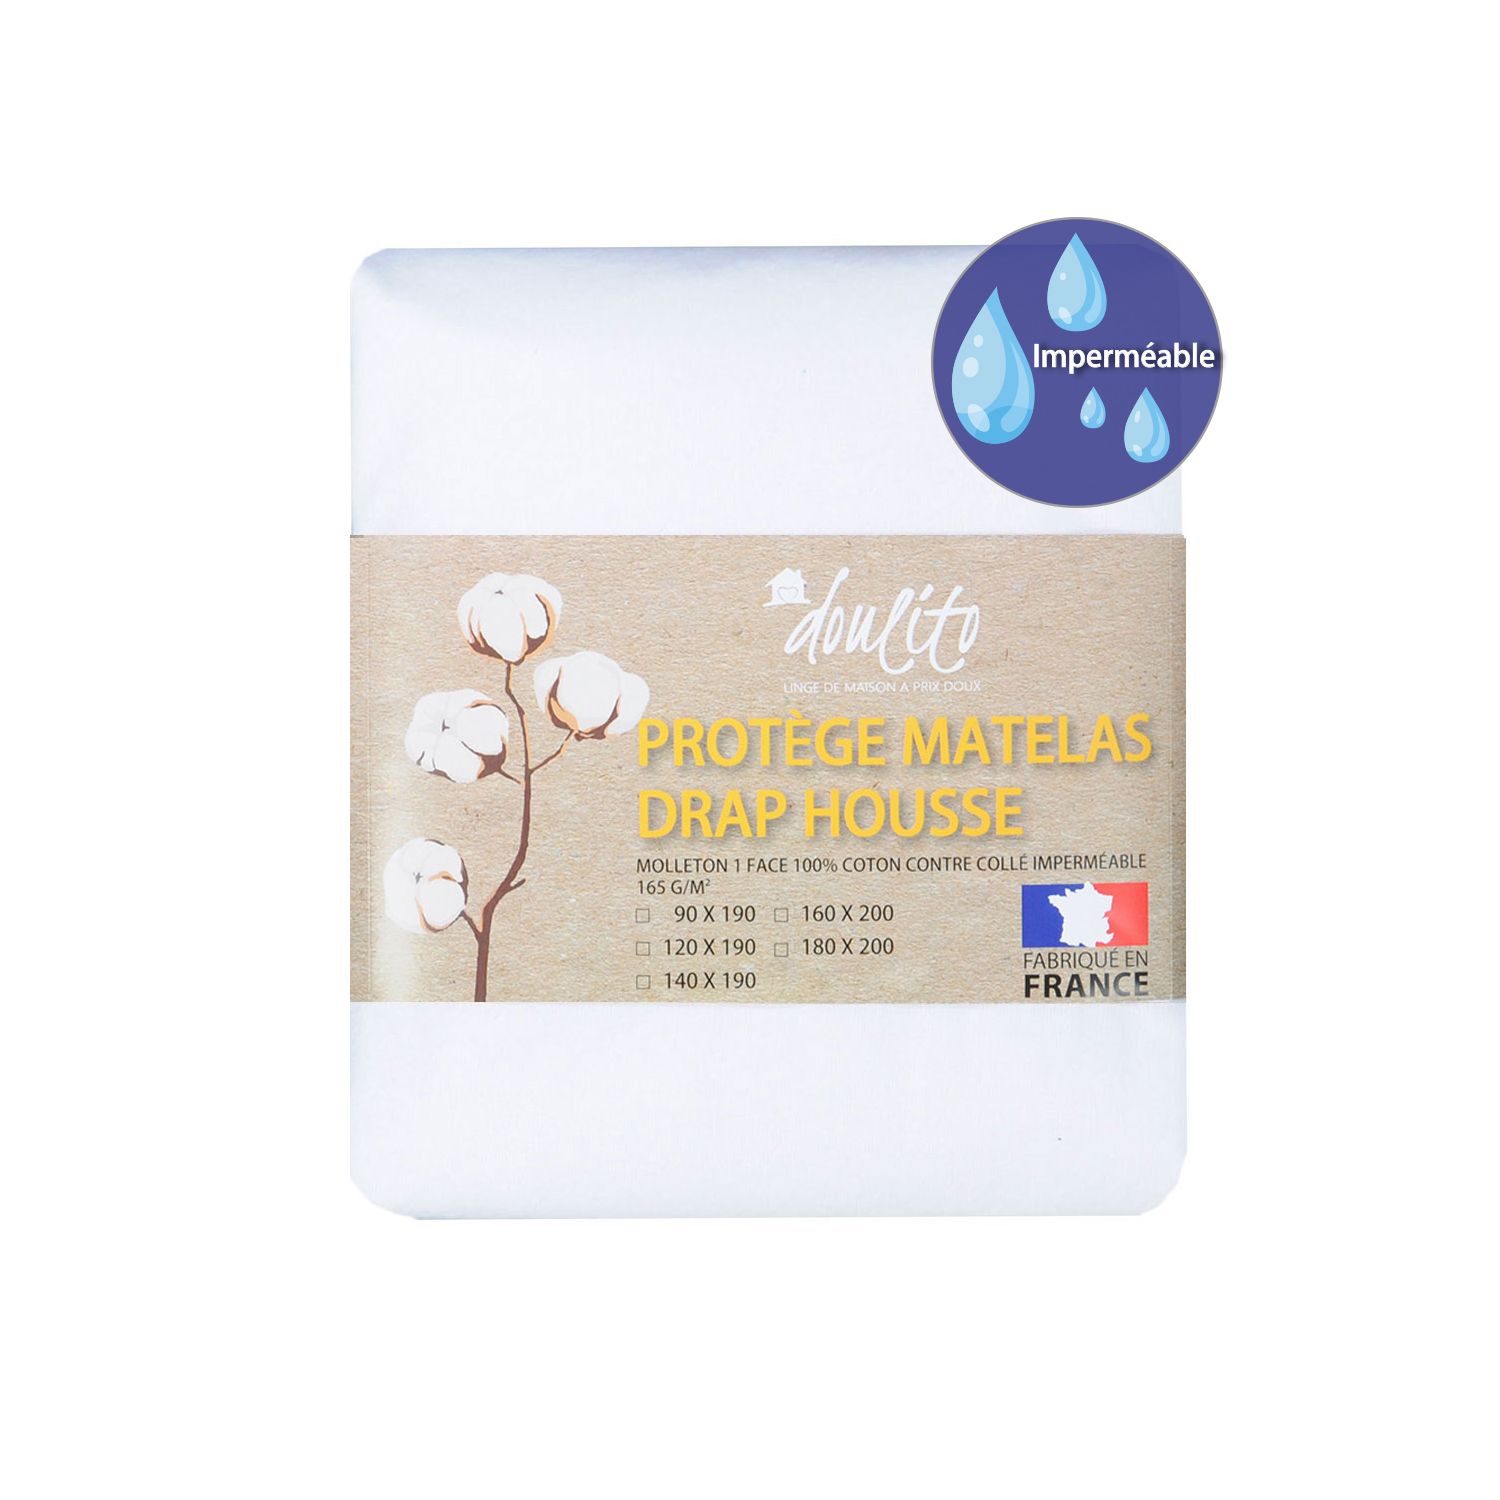 Protège matelas imperméable Doulito - 160x200 cm - Made in France - Coton